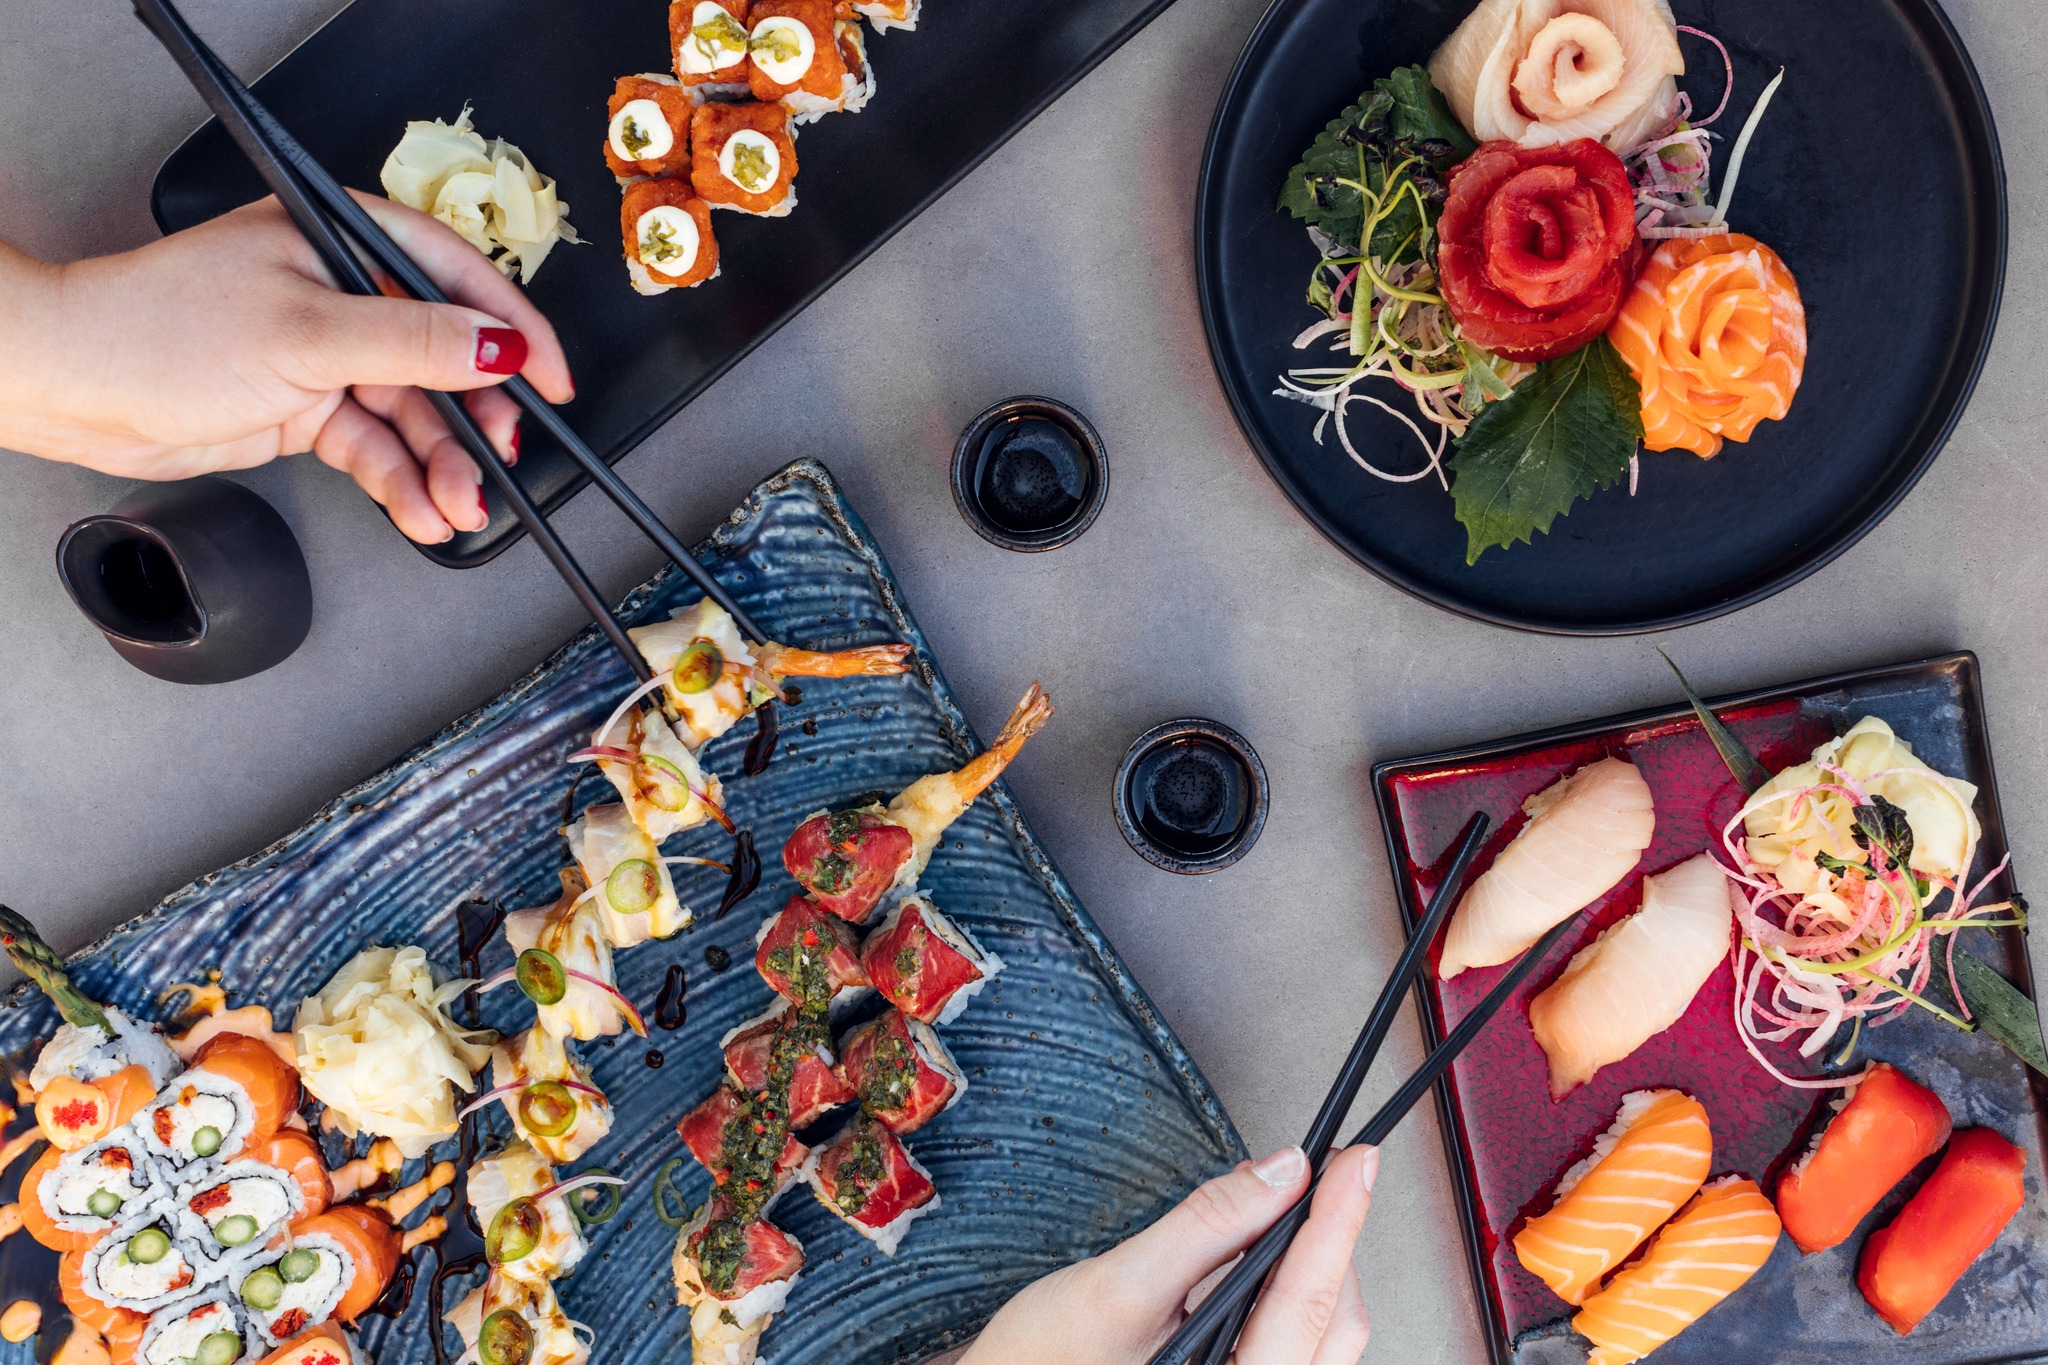 A spread of various sushi dishes, including rolls and nigiri, with two hands and chopsticks.